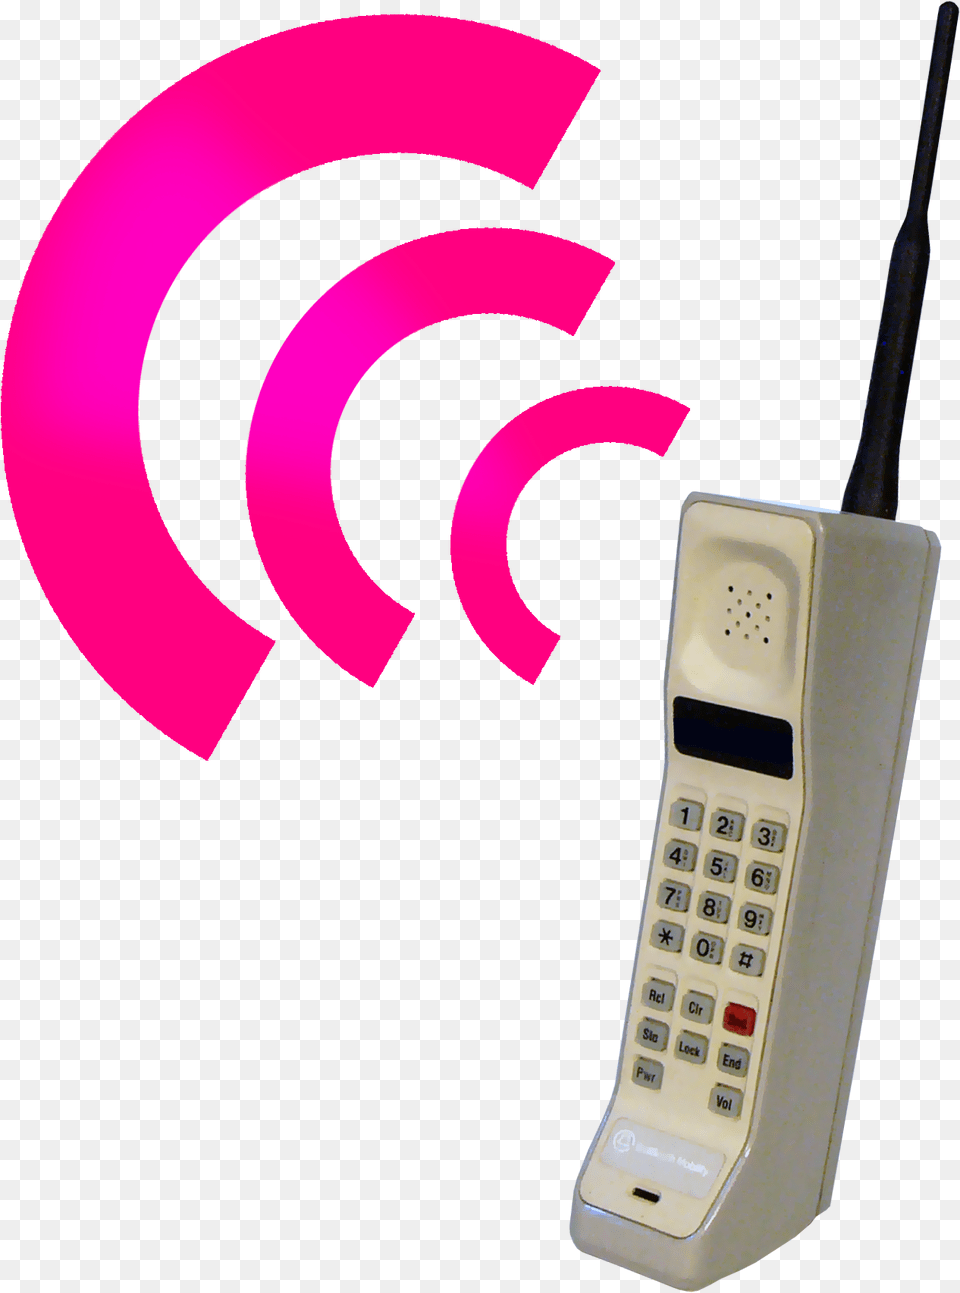 Ibm Phone Telephone Cell Bag Simon Hq 90s Cell Phone Clip Art, Electronics, Mobile Phone Free Transparent Png